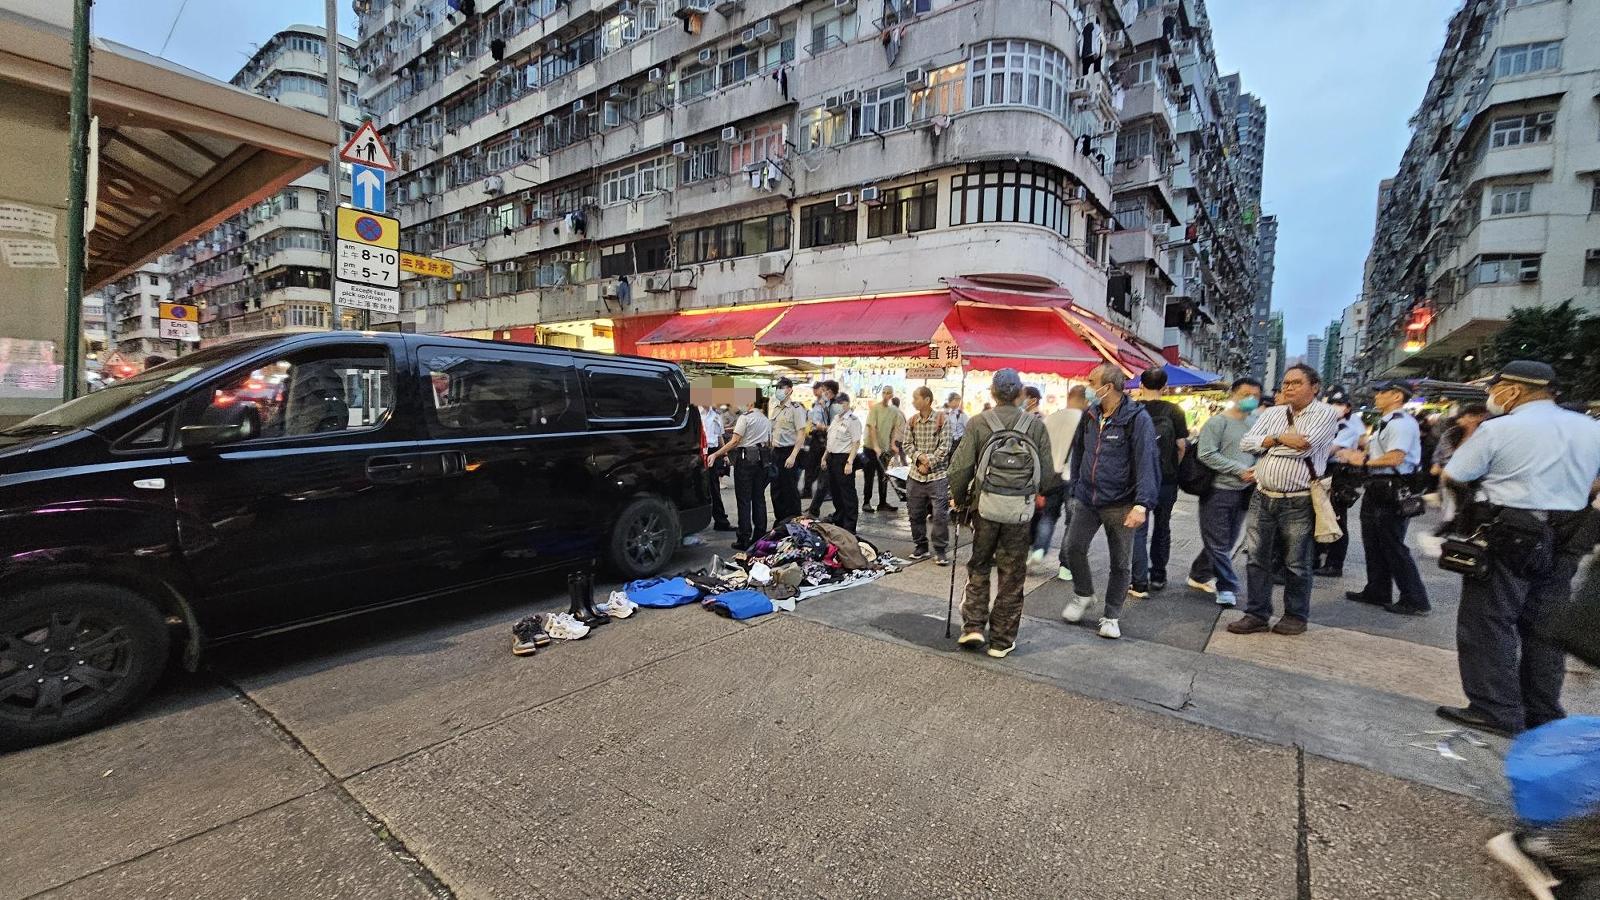 A spokesman for the Food and Environmental Hygiene Department (FEHD) said today (April 13) that the FEHD and the Hong Kong Police Force have conducted law enforcement operations in Sham Shui Po over the past few days to combat the increasingly rampant and suspected organised unlicensed hawking activities in the district, so as to keep streets clear of obstruction and maintain environment hygiene.